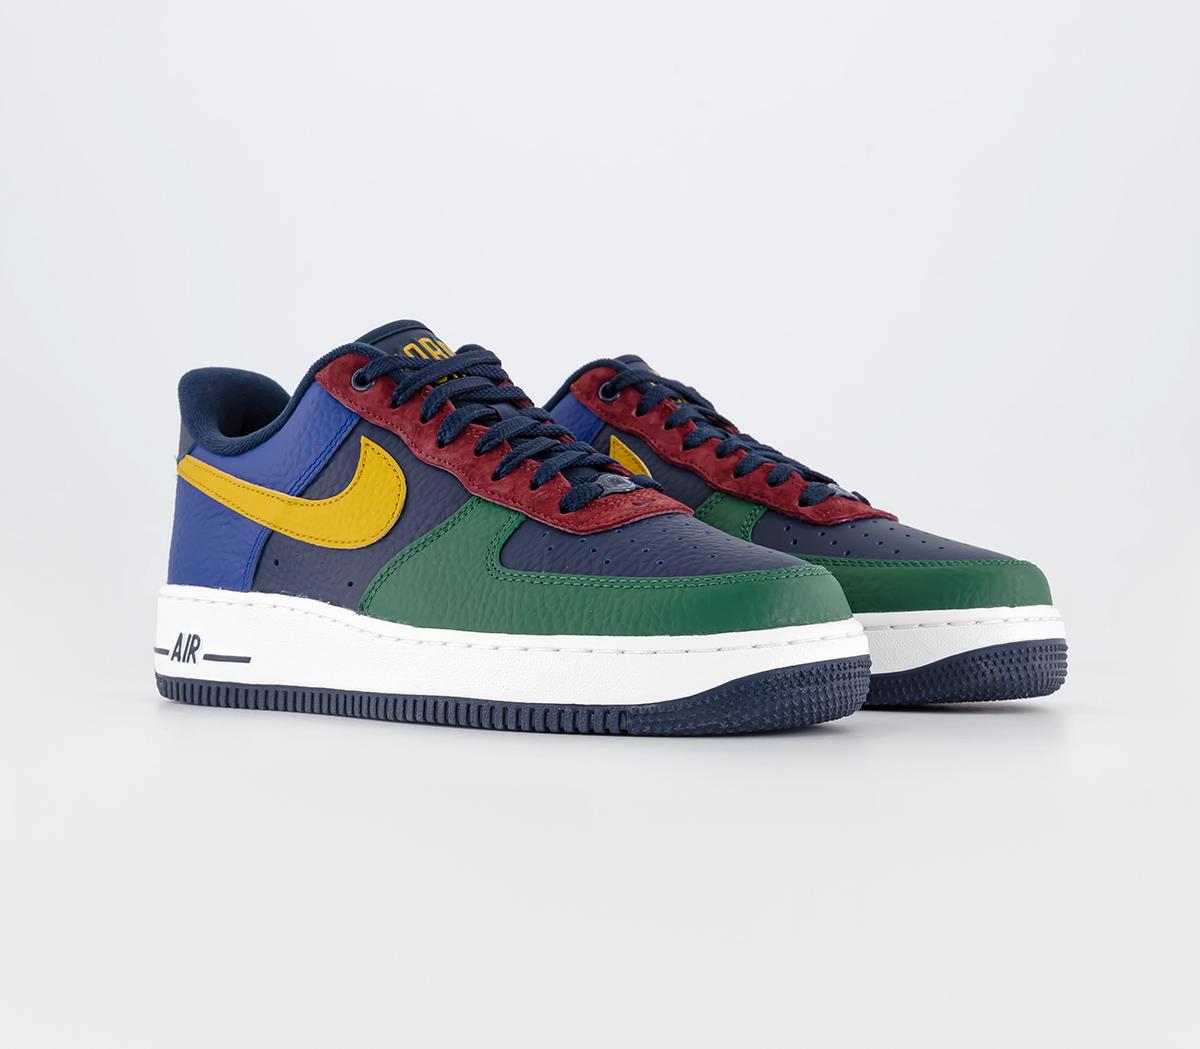 Nike Womens Air Force 1 07 Trainers Gorge Green Gold Suede Obsidian Deep Royal Blue Te, 3